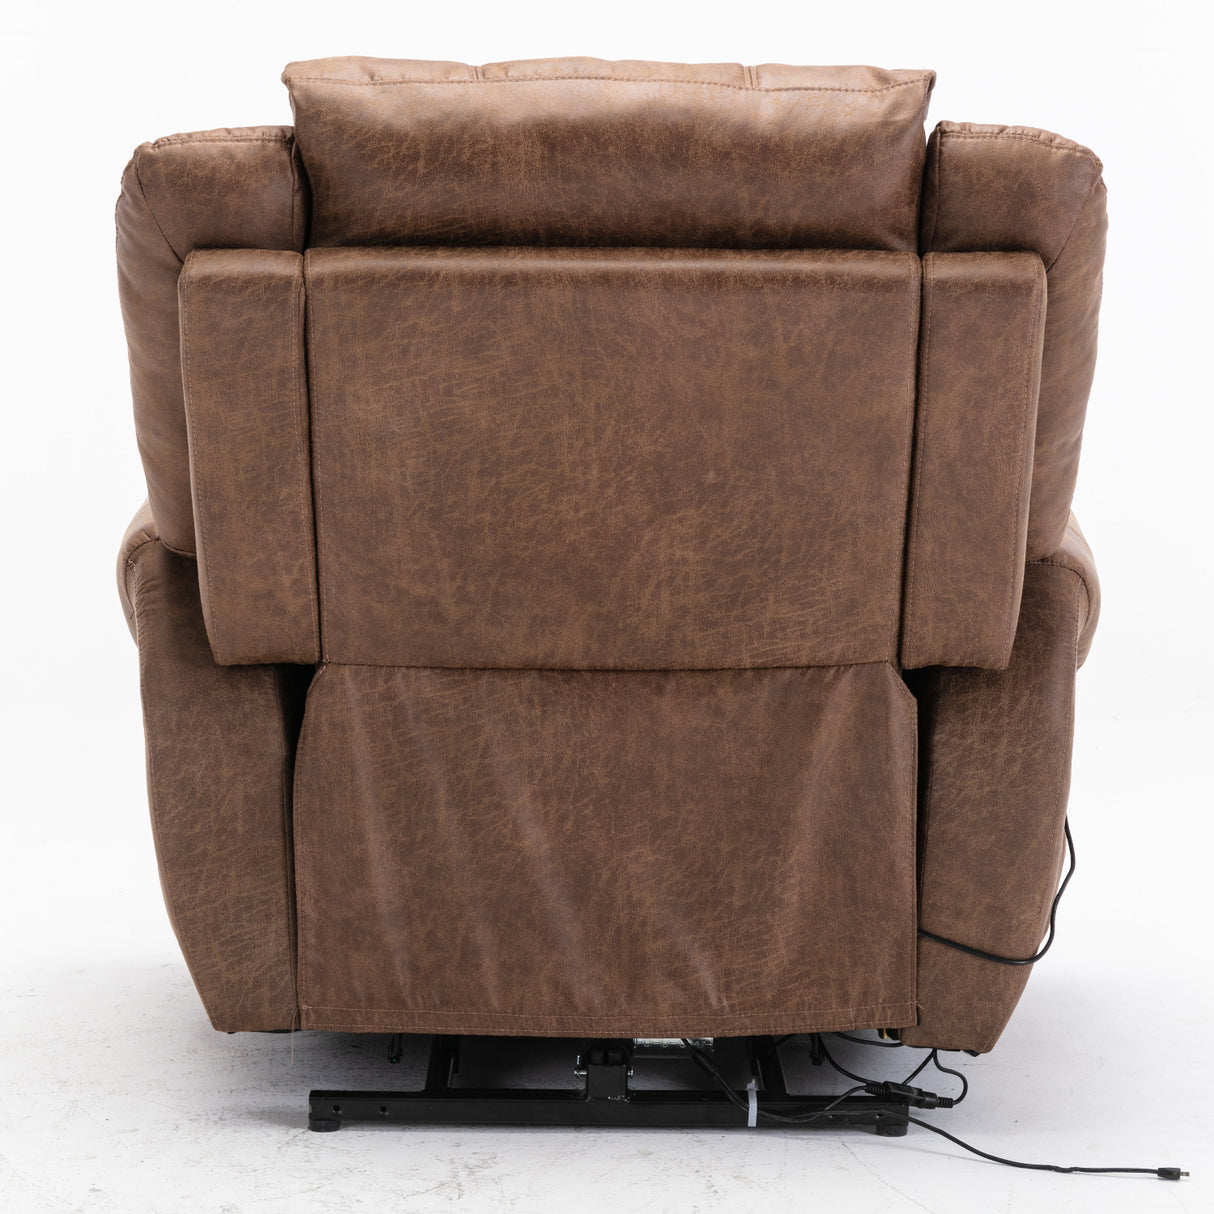 Power Lift Recliner Chairs with Massage and Heat Breathable Faux Leather Electric Lift Chairs for Elderly, Heavy Duty Big Man Recliners Power Reclining Chair with USB Port (Nut Brown) Home Elegance USA